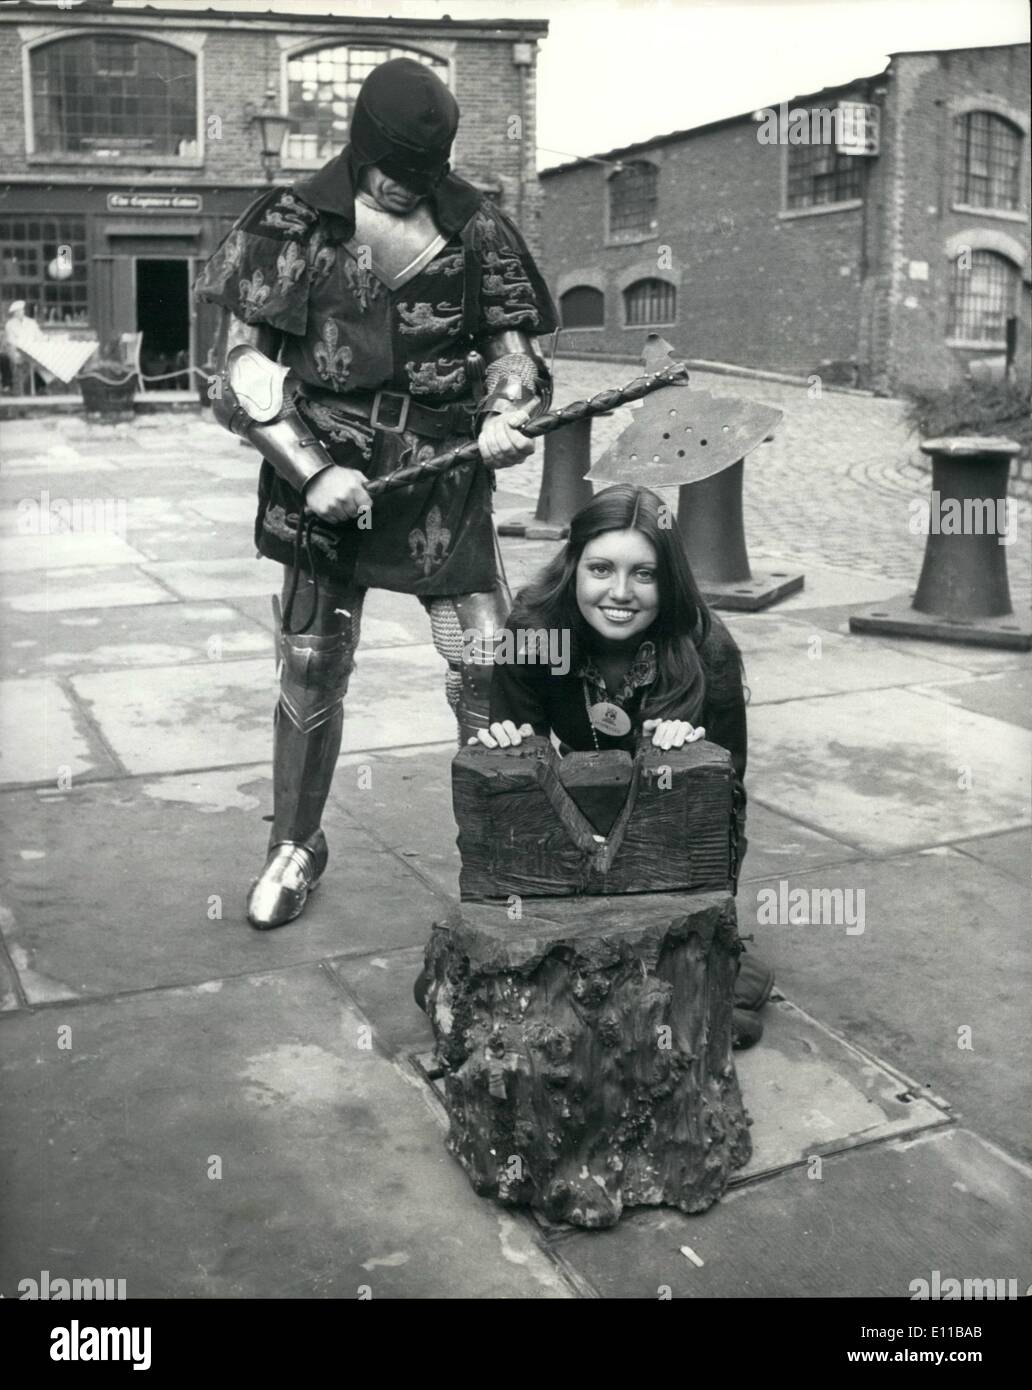 Nov. 11, 1976 - Miss World's Take A Trip On The Thames. Contestants for the ''Miss World'' contest which takes place at the Royal Albert Hall, took a trip on the River Thames, aboard the ''Father Thames'' pleasure boat. Photo Shows:- Miss Australia, 19 year old Karen Jo Pini with her head on the chopping block during a visit to the Tower of London - during a break in their river-trip-the man holding the axe is Mr. Tim Condren who is a professional Knight and stunt man. Stock Photo